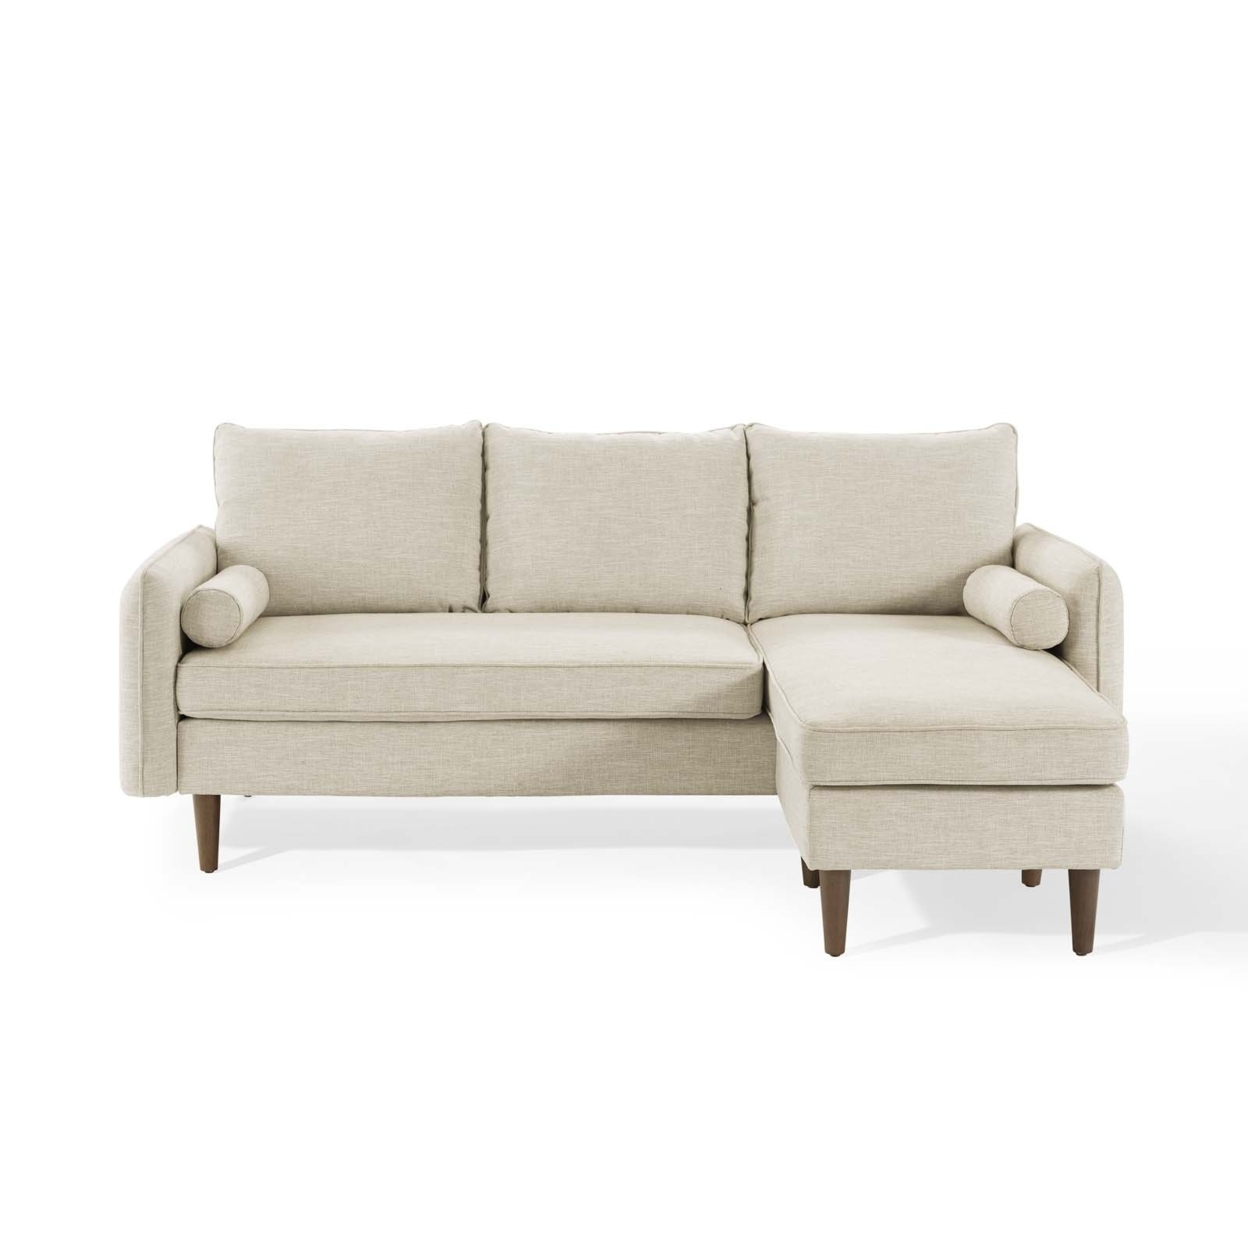 Revive Upholstered Right Or Left Sectional Sofa, Beige